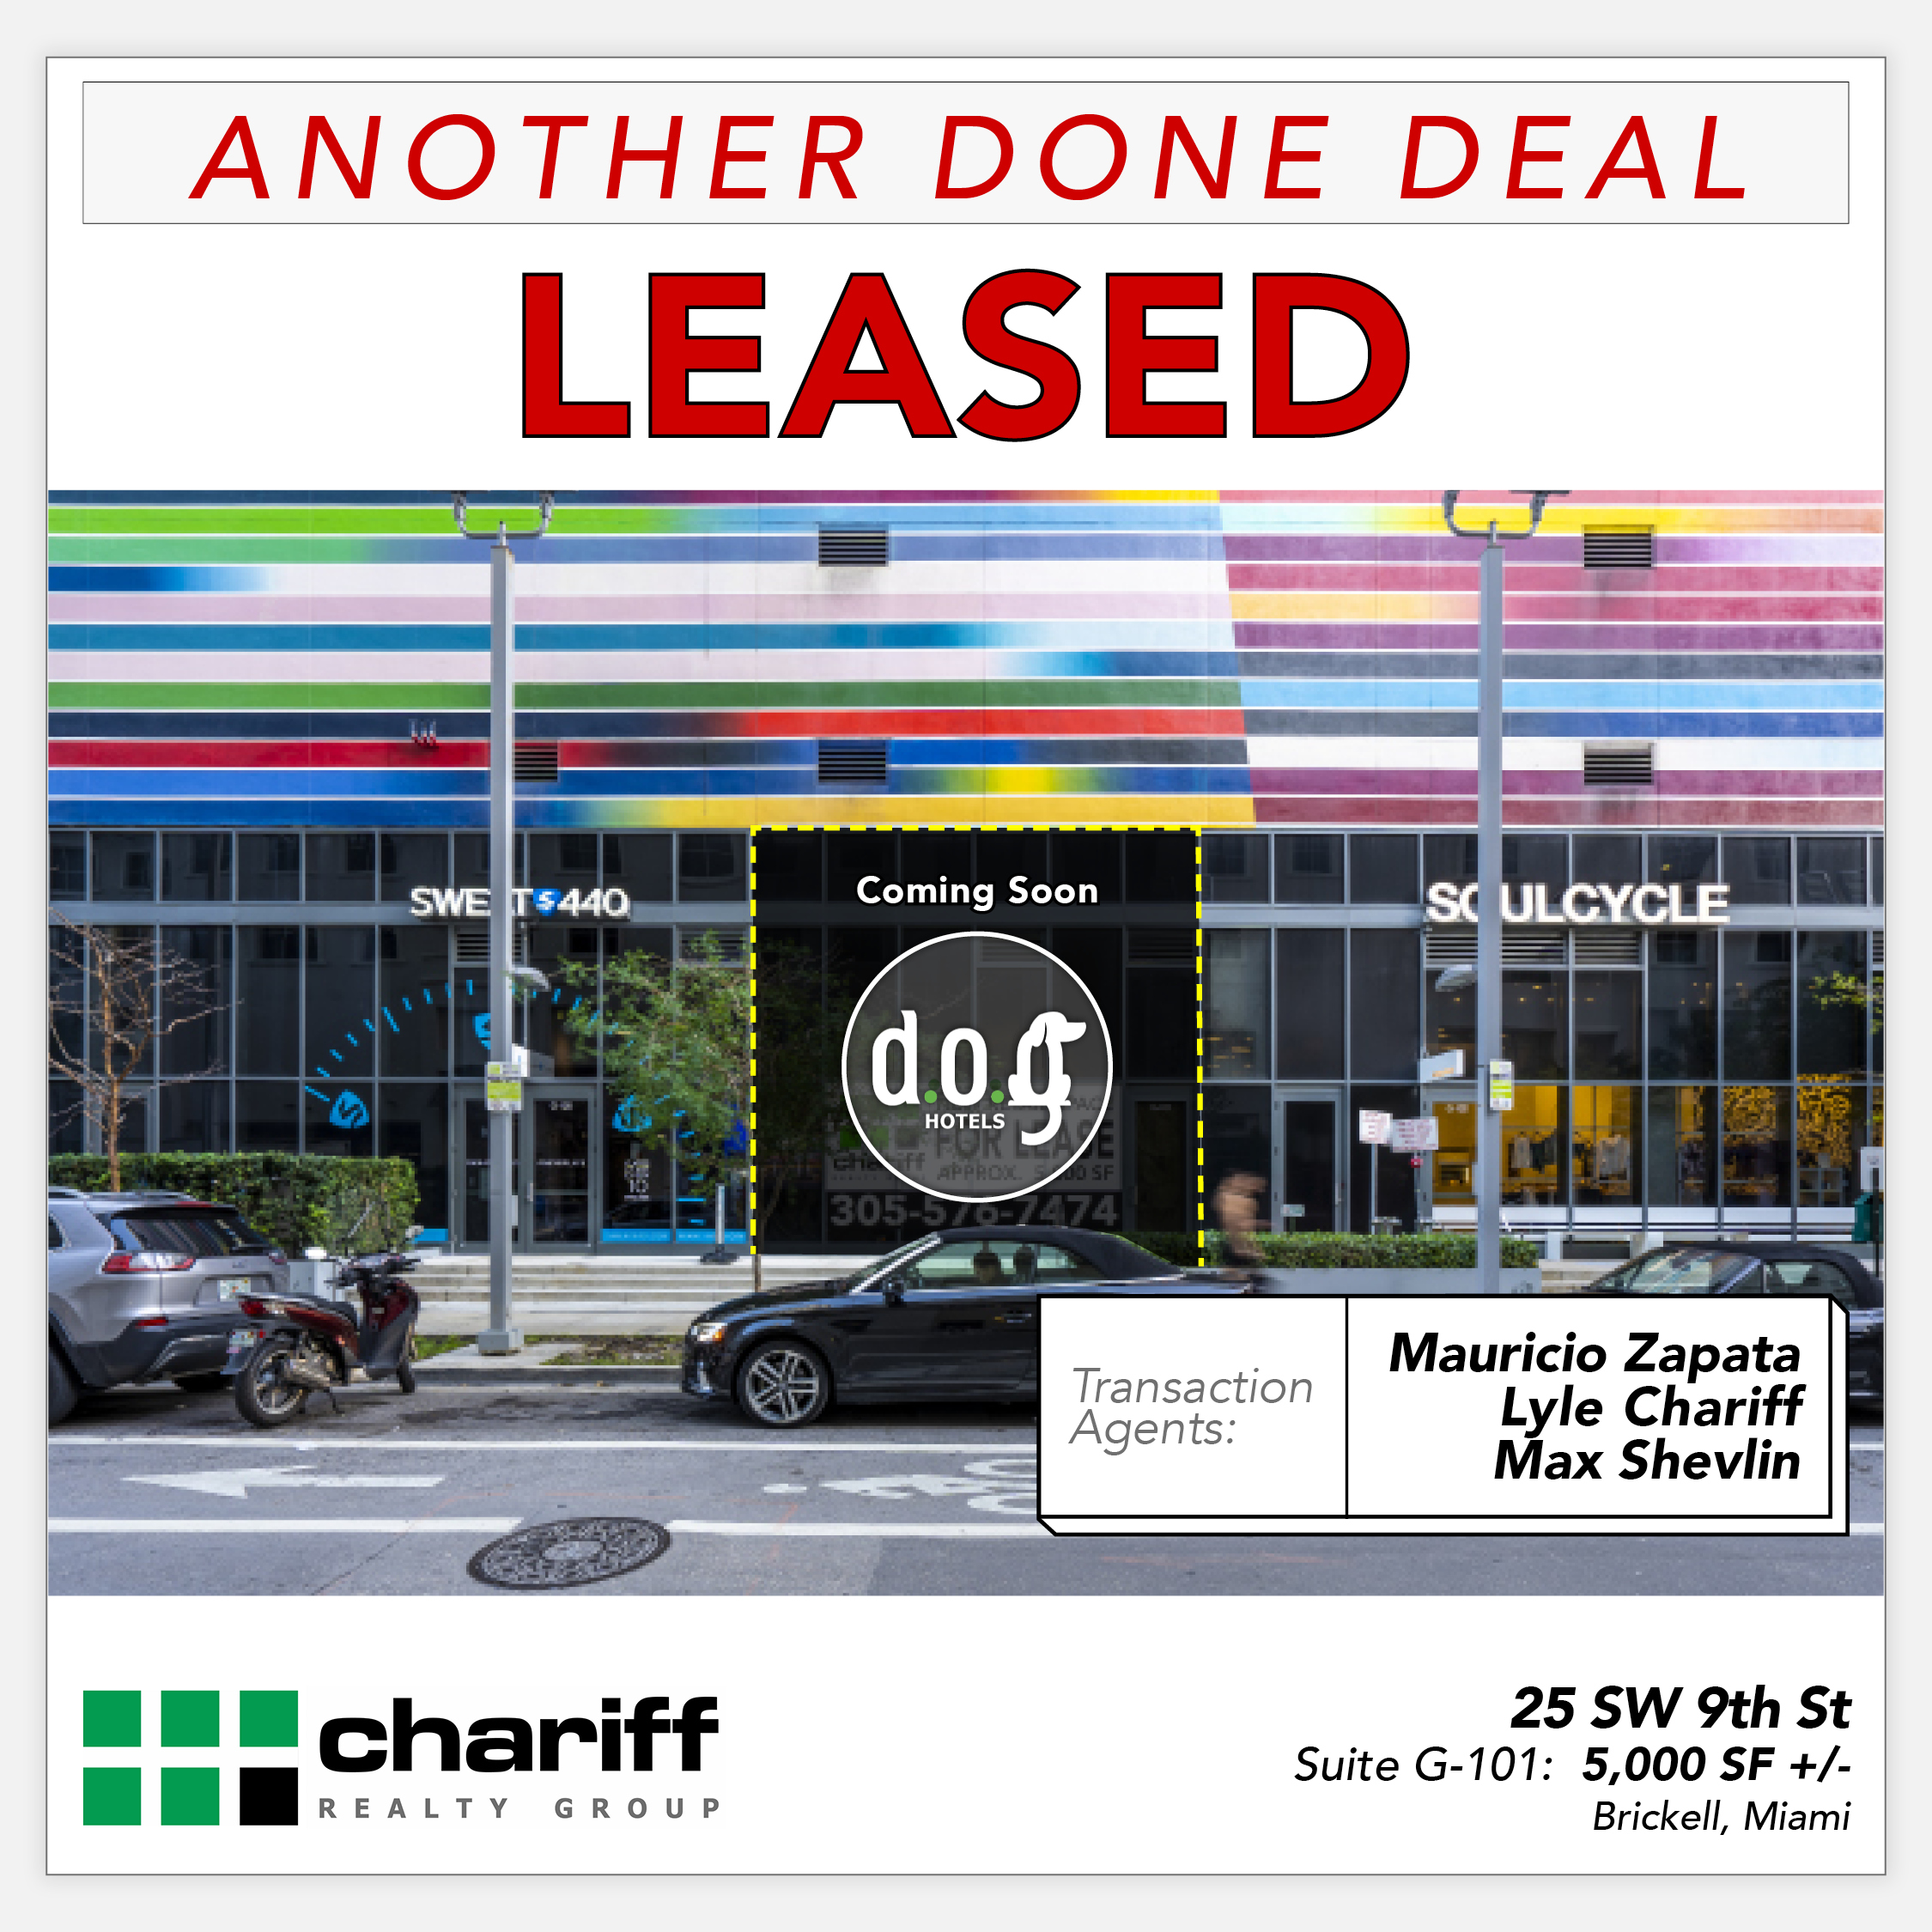 25 SW 9th St - Another Done Deal- Leased - Brickell -Miami-Florida - 33139 -Chariff Realty Group